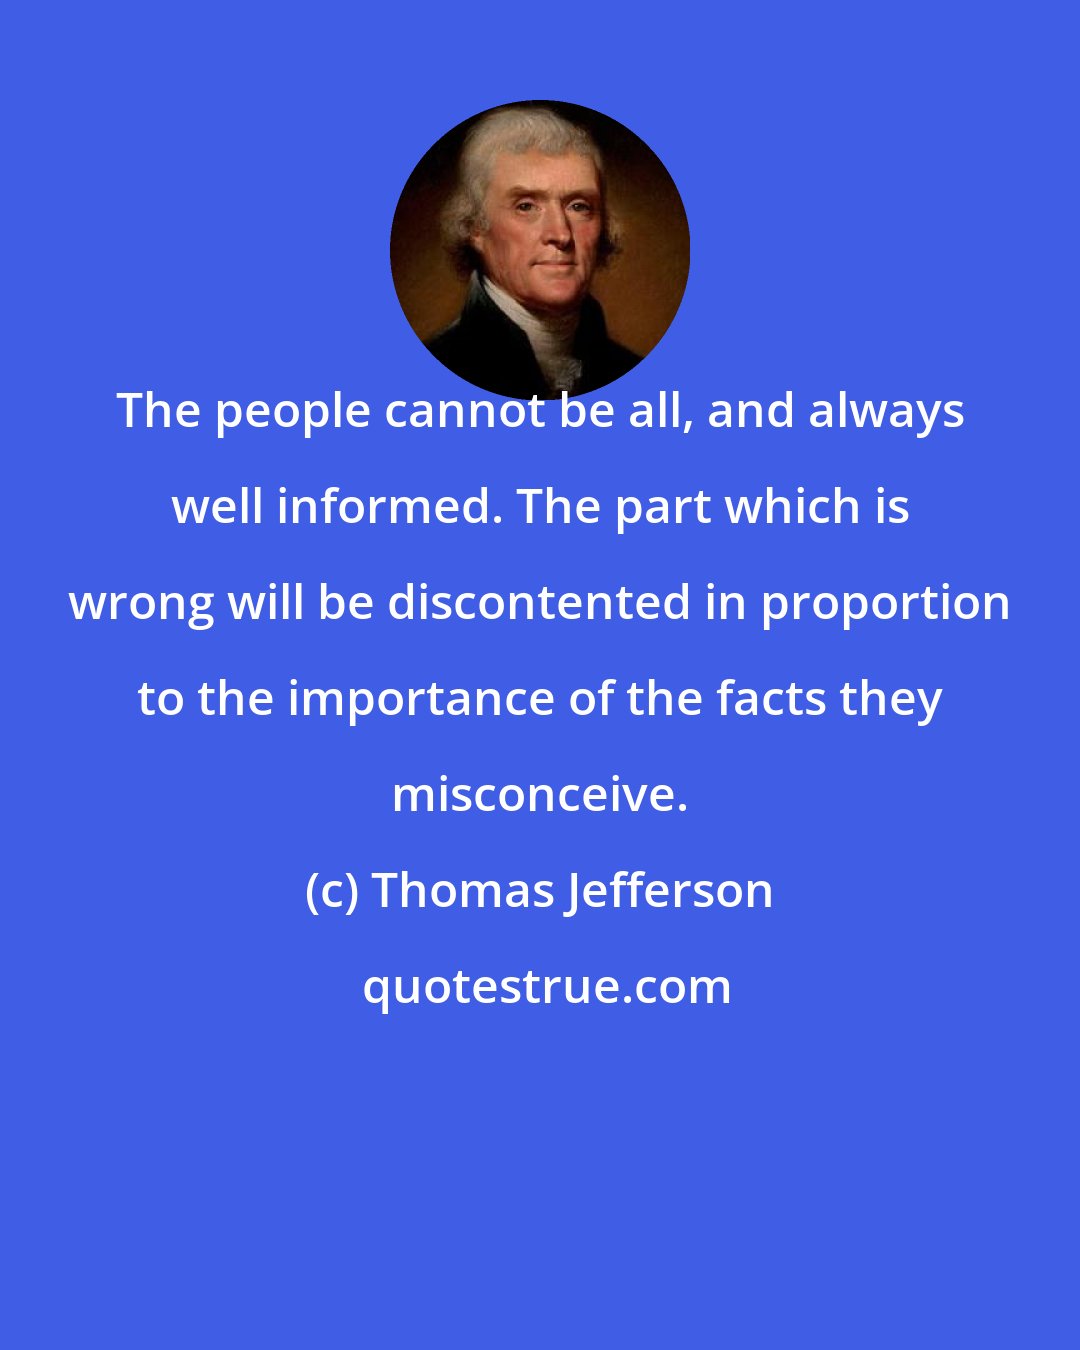 Thomas Jefferson: The people cannot be all, and always well informed. The part which is wrong will be discontented in proportion to the importance of the facts they misconceive.